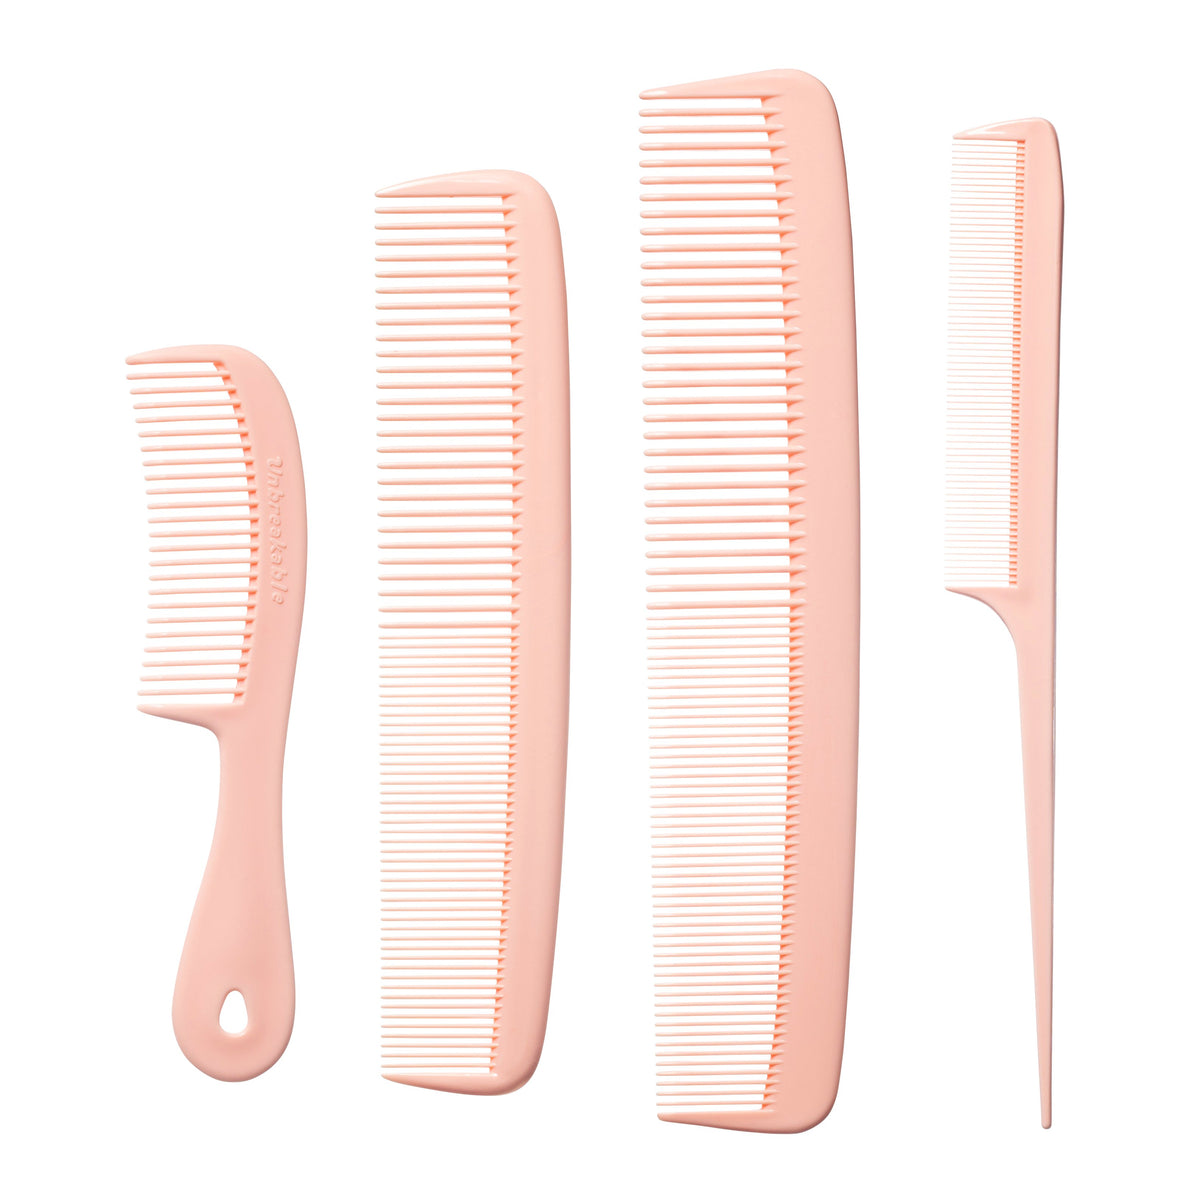 Mars Wellness 4 Piece Professional Comb Set - USA MADE - Fine Pro Tail Combs, Dresser Hair Comb Styling Comb - Premium Grade for Men and Women - Parting Teasing and Styling